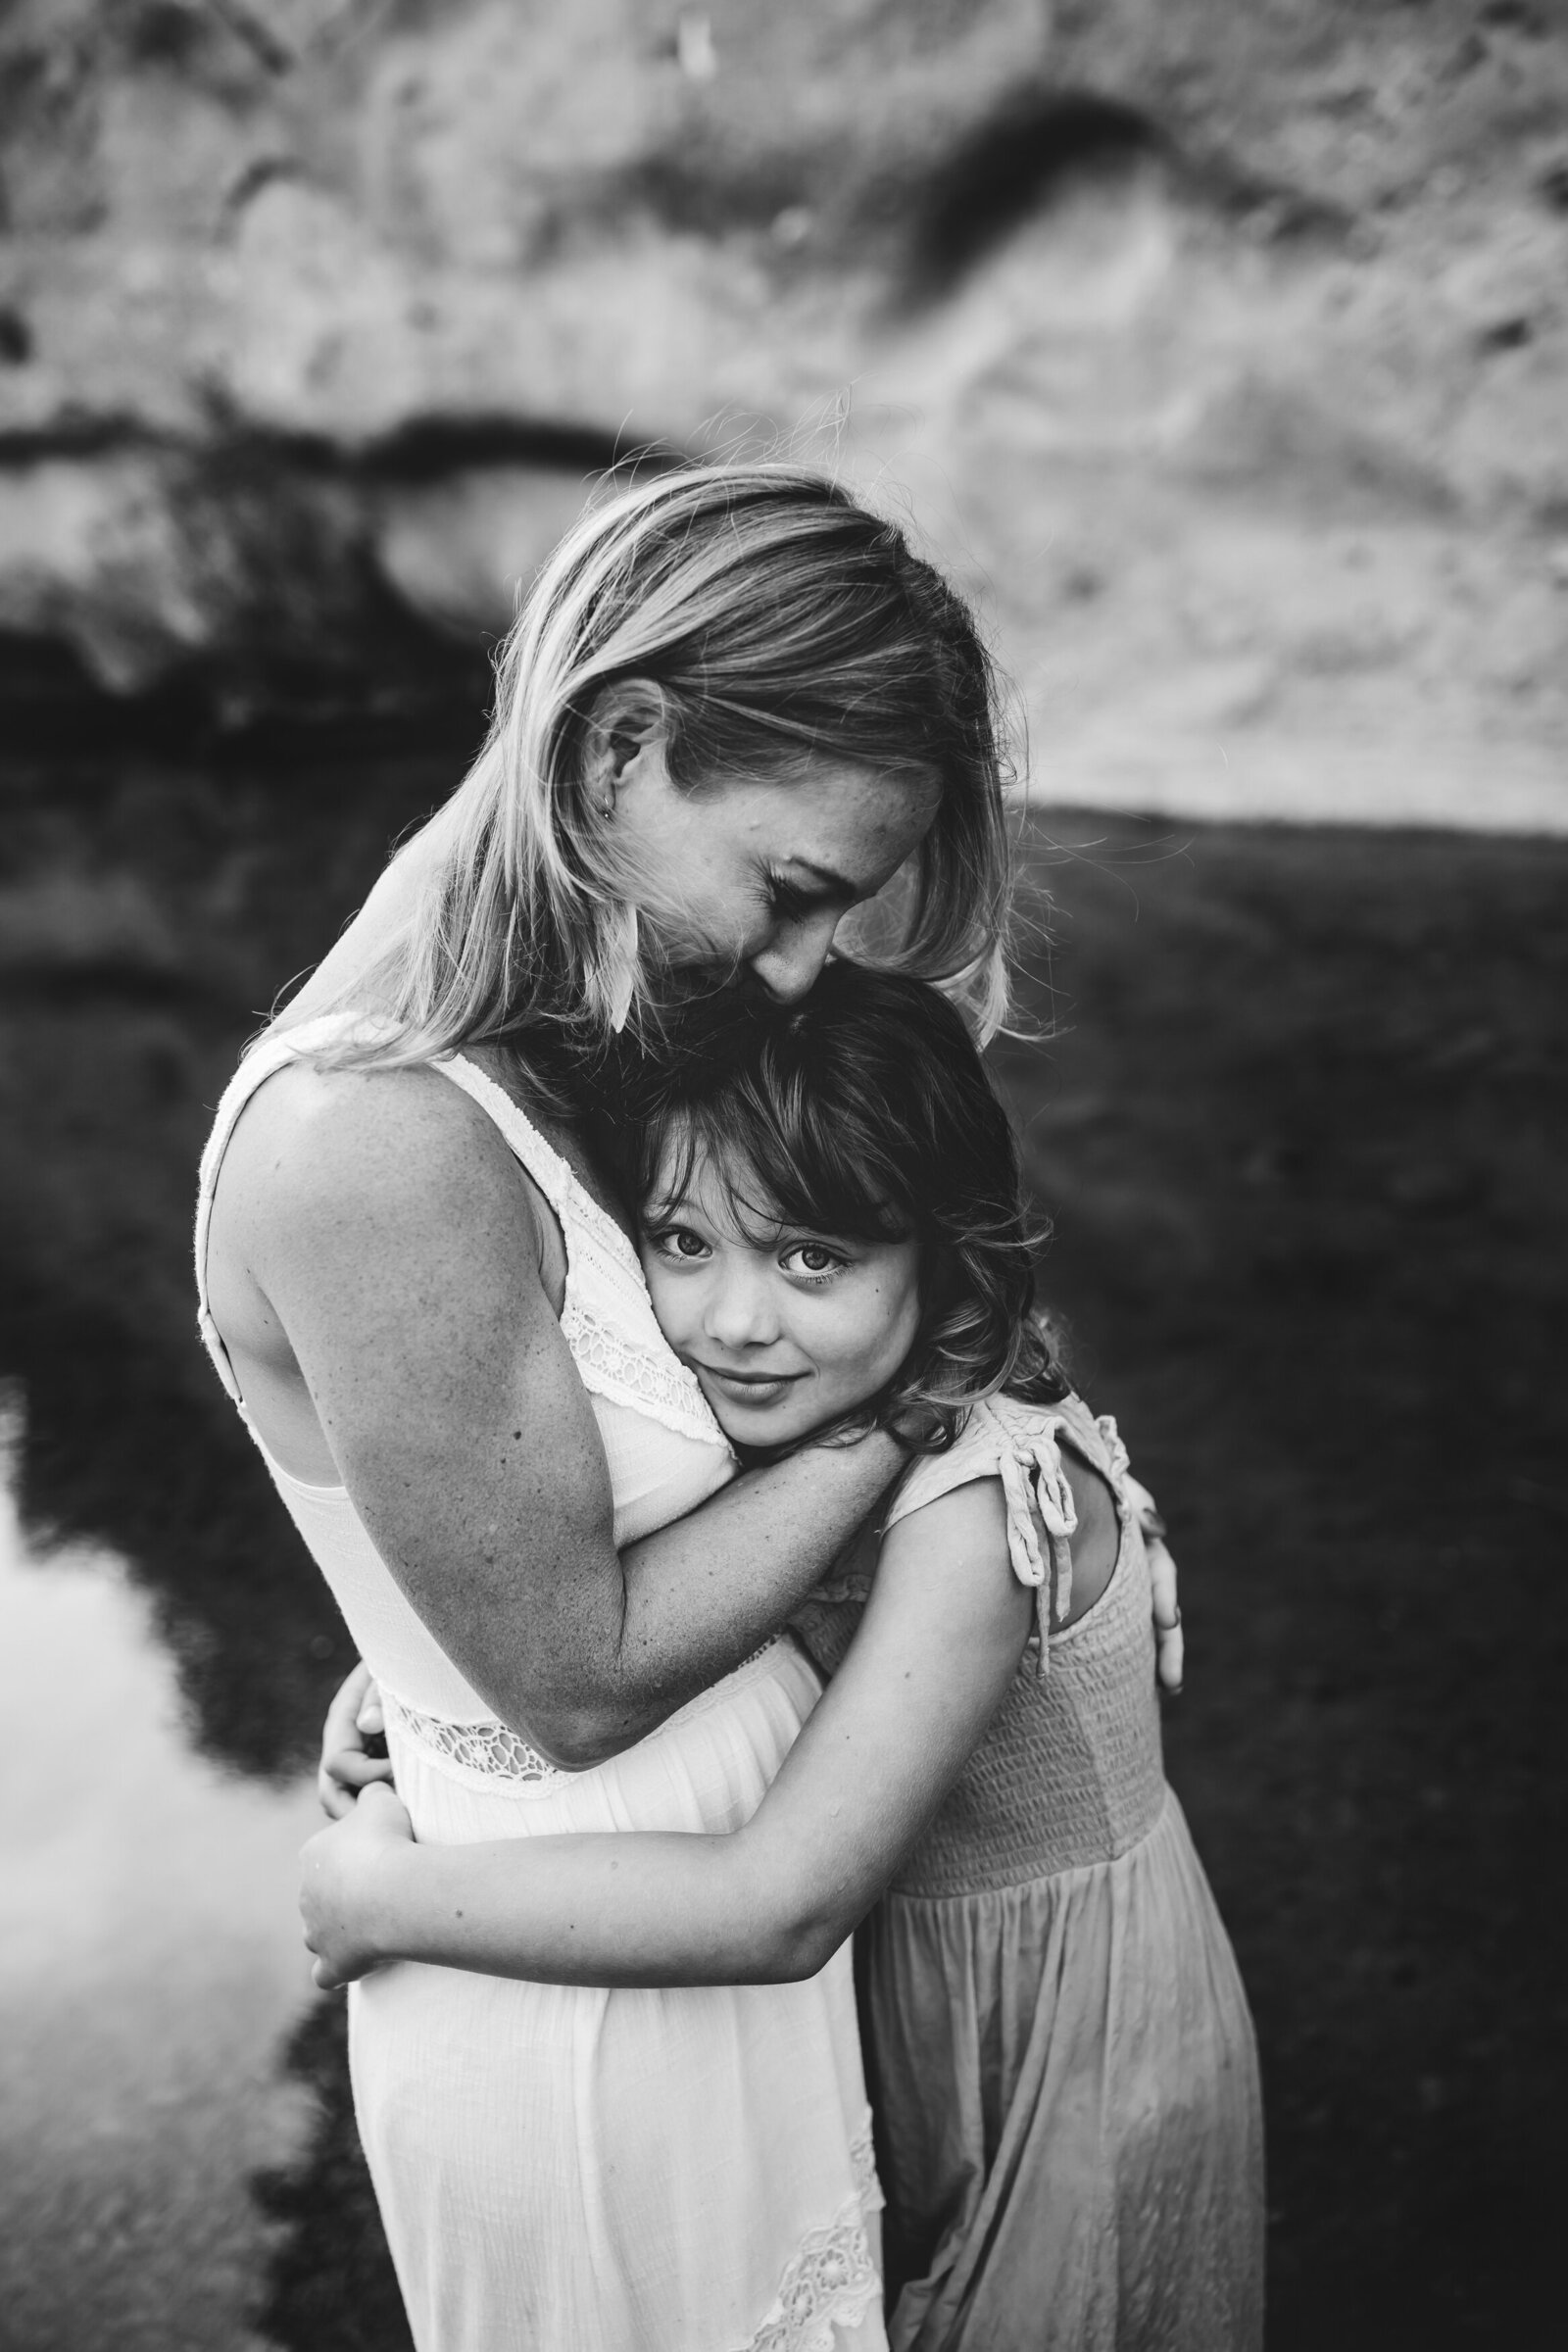 untitled-201009-178-Edit-2Mother-embraces-daughter-girl-looks-into-camera-bnw-emotive-ventura-county